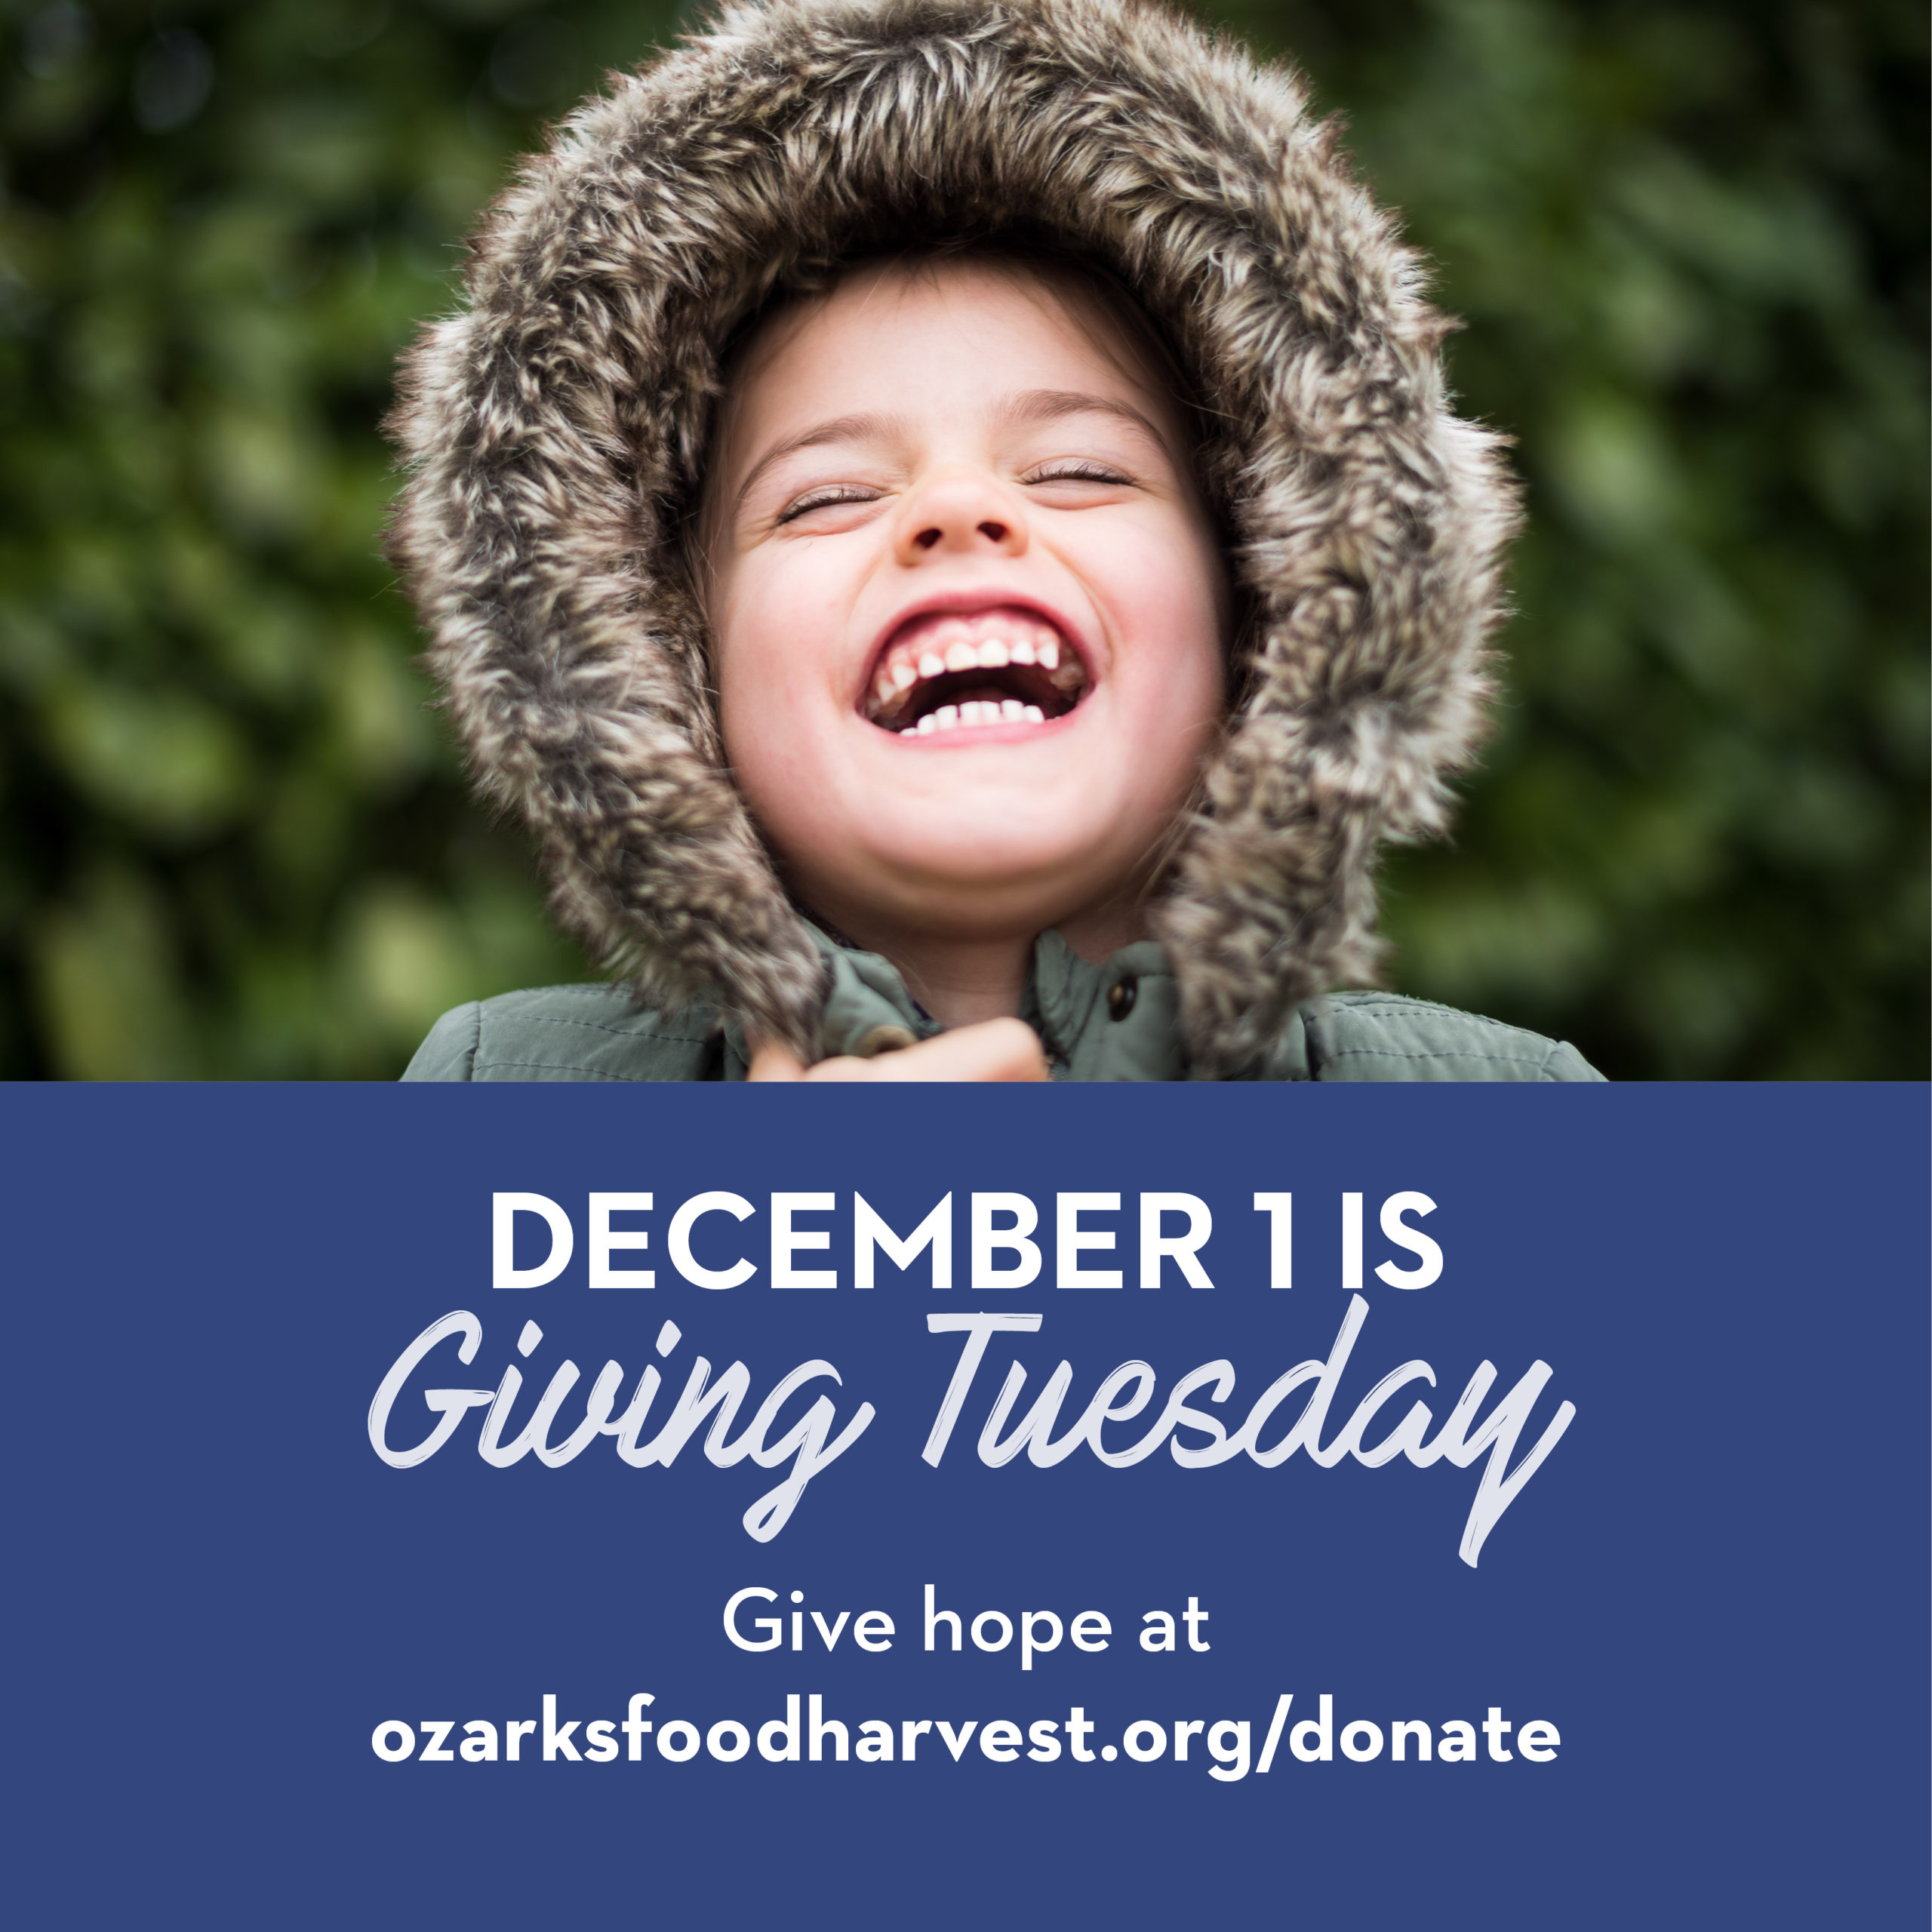 #GivingTuesday is December 1